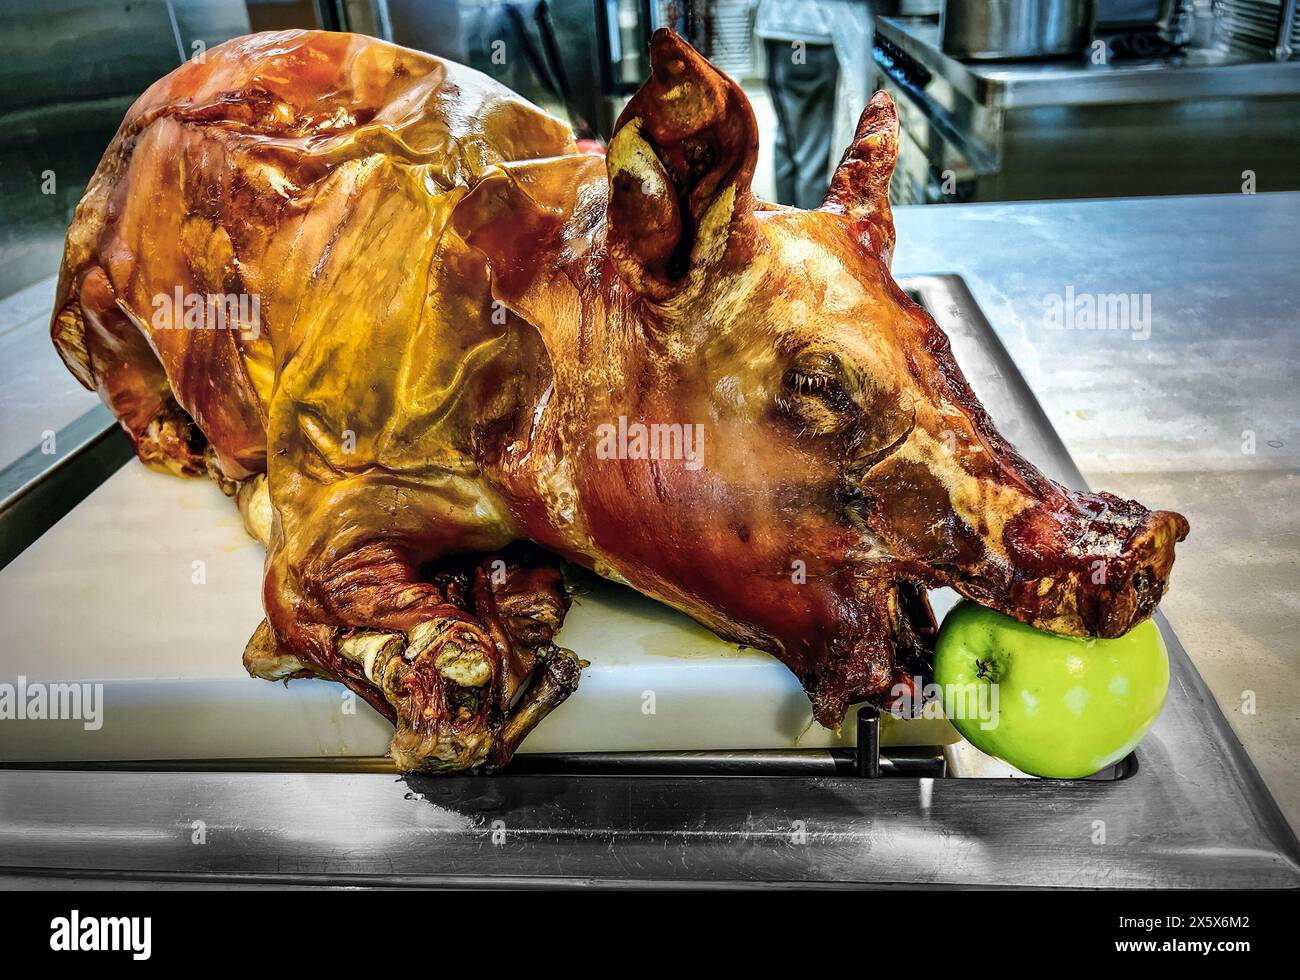 Roasted pig with a green apple in its mouth being served. Stock Photo